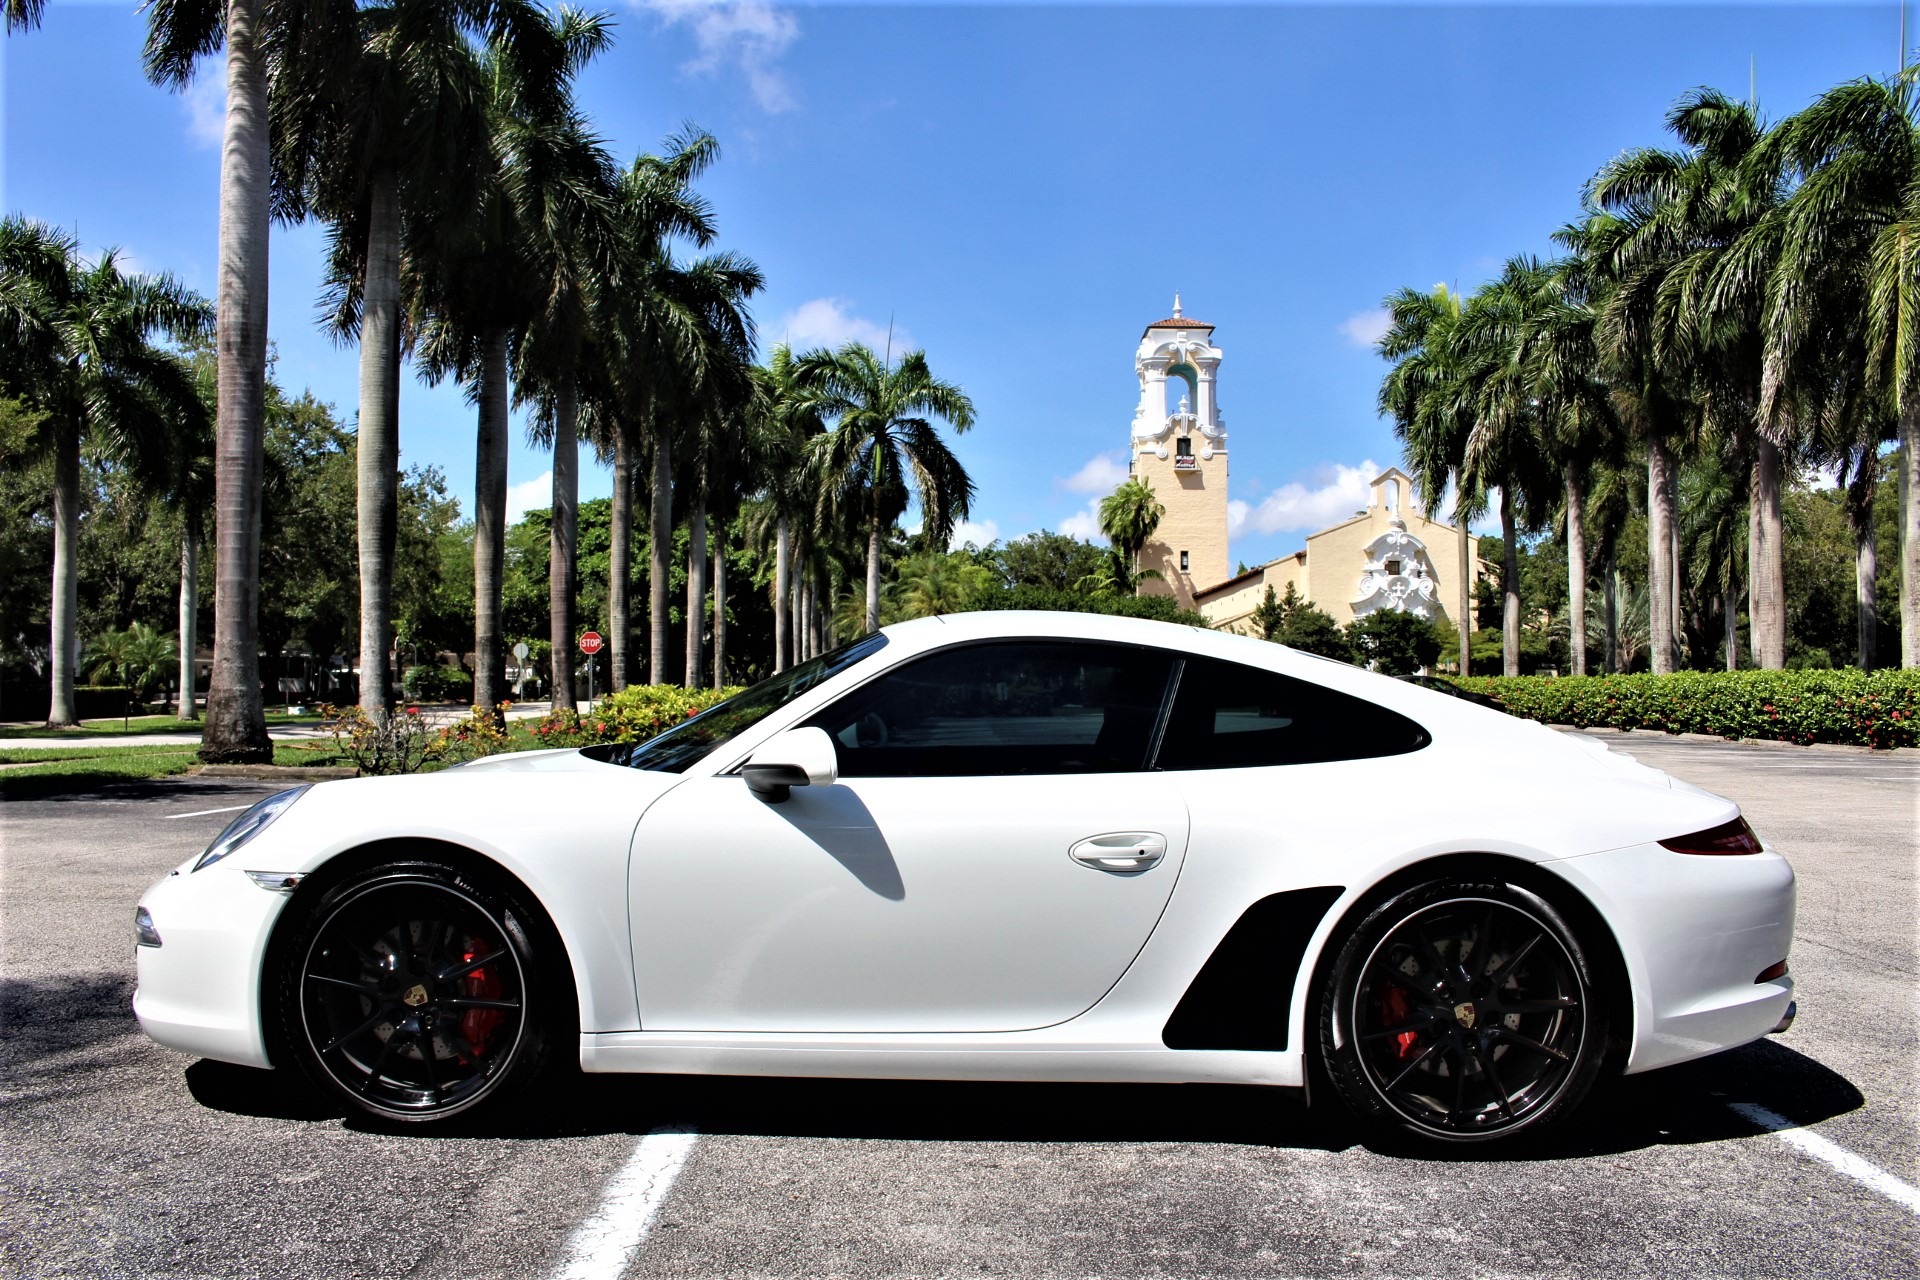 Used 2013 Porsche 911 Carrera S for sale Sold at The Gables Sports Cars in Miami FL 33146 3